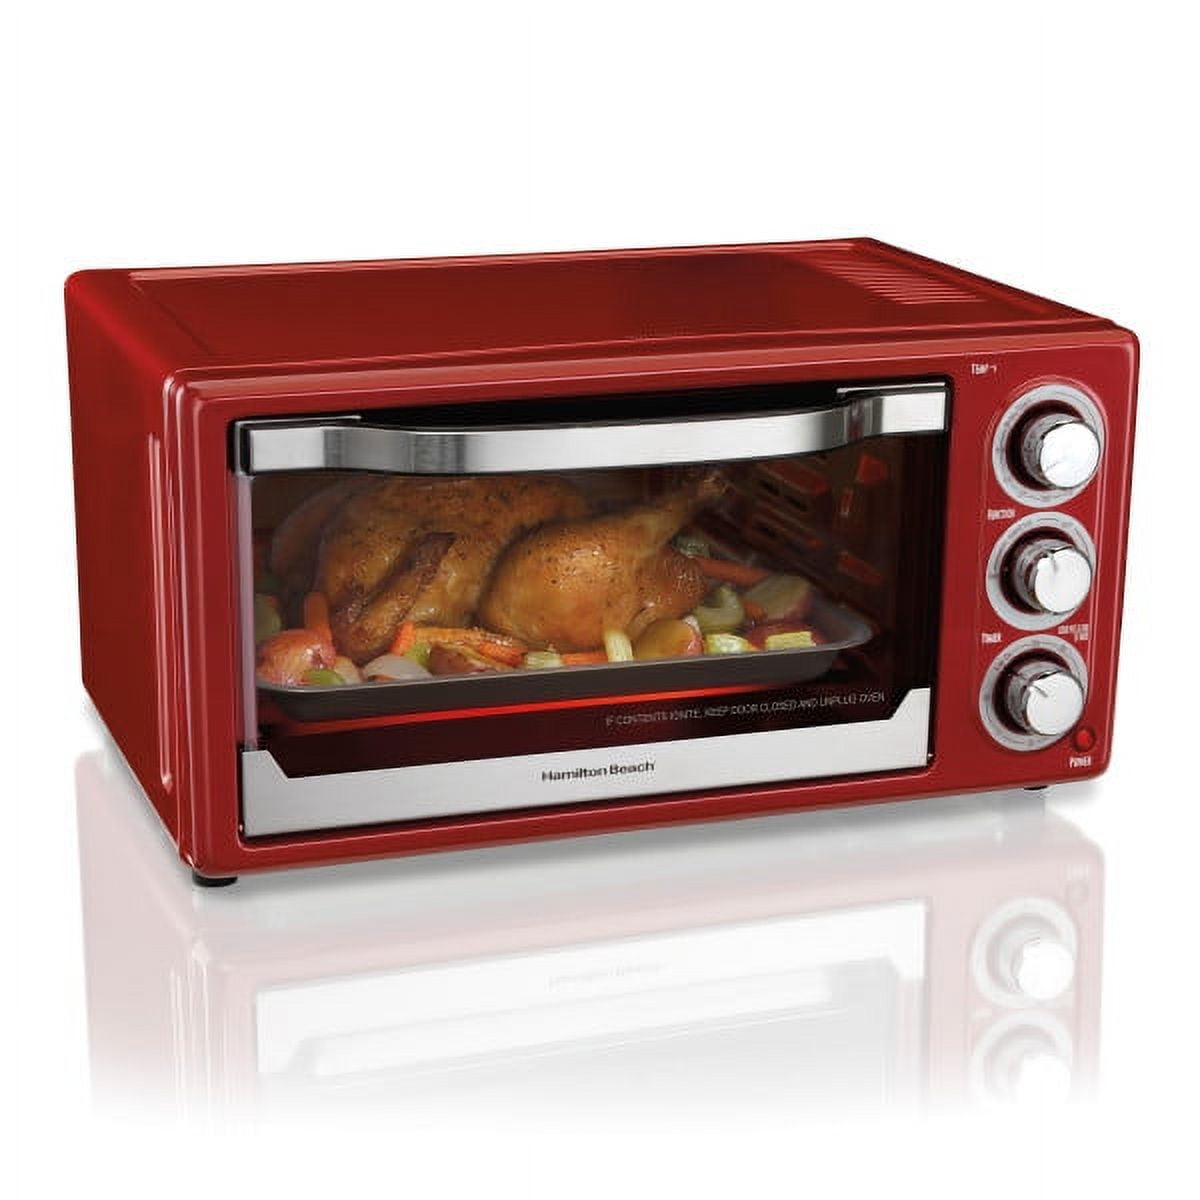 Hamilton Beach Toaster Oven Air Fryer Combo with Large Capacity, Fits 6  Slices or 12” Pizza